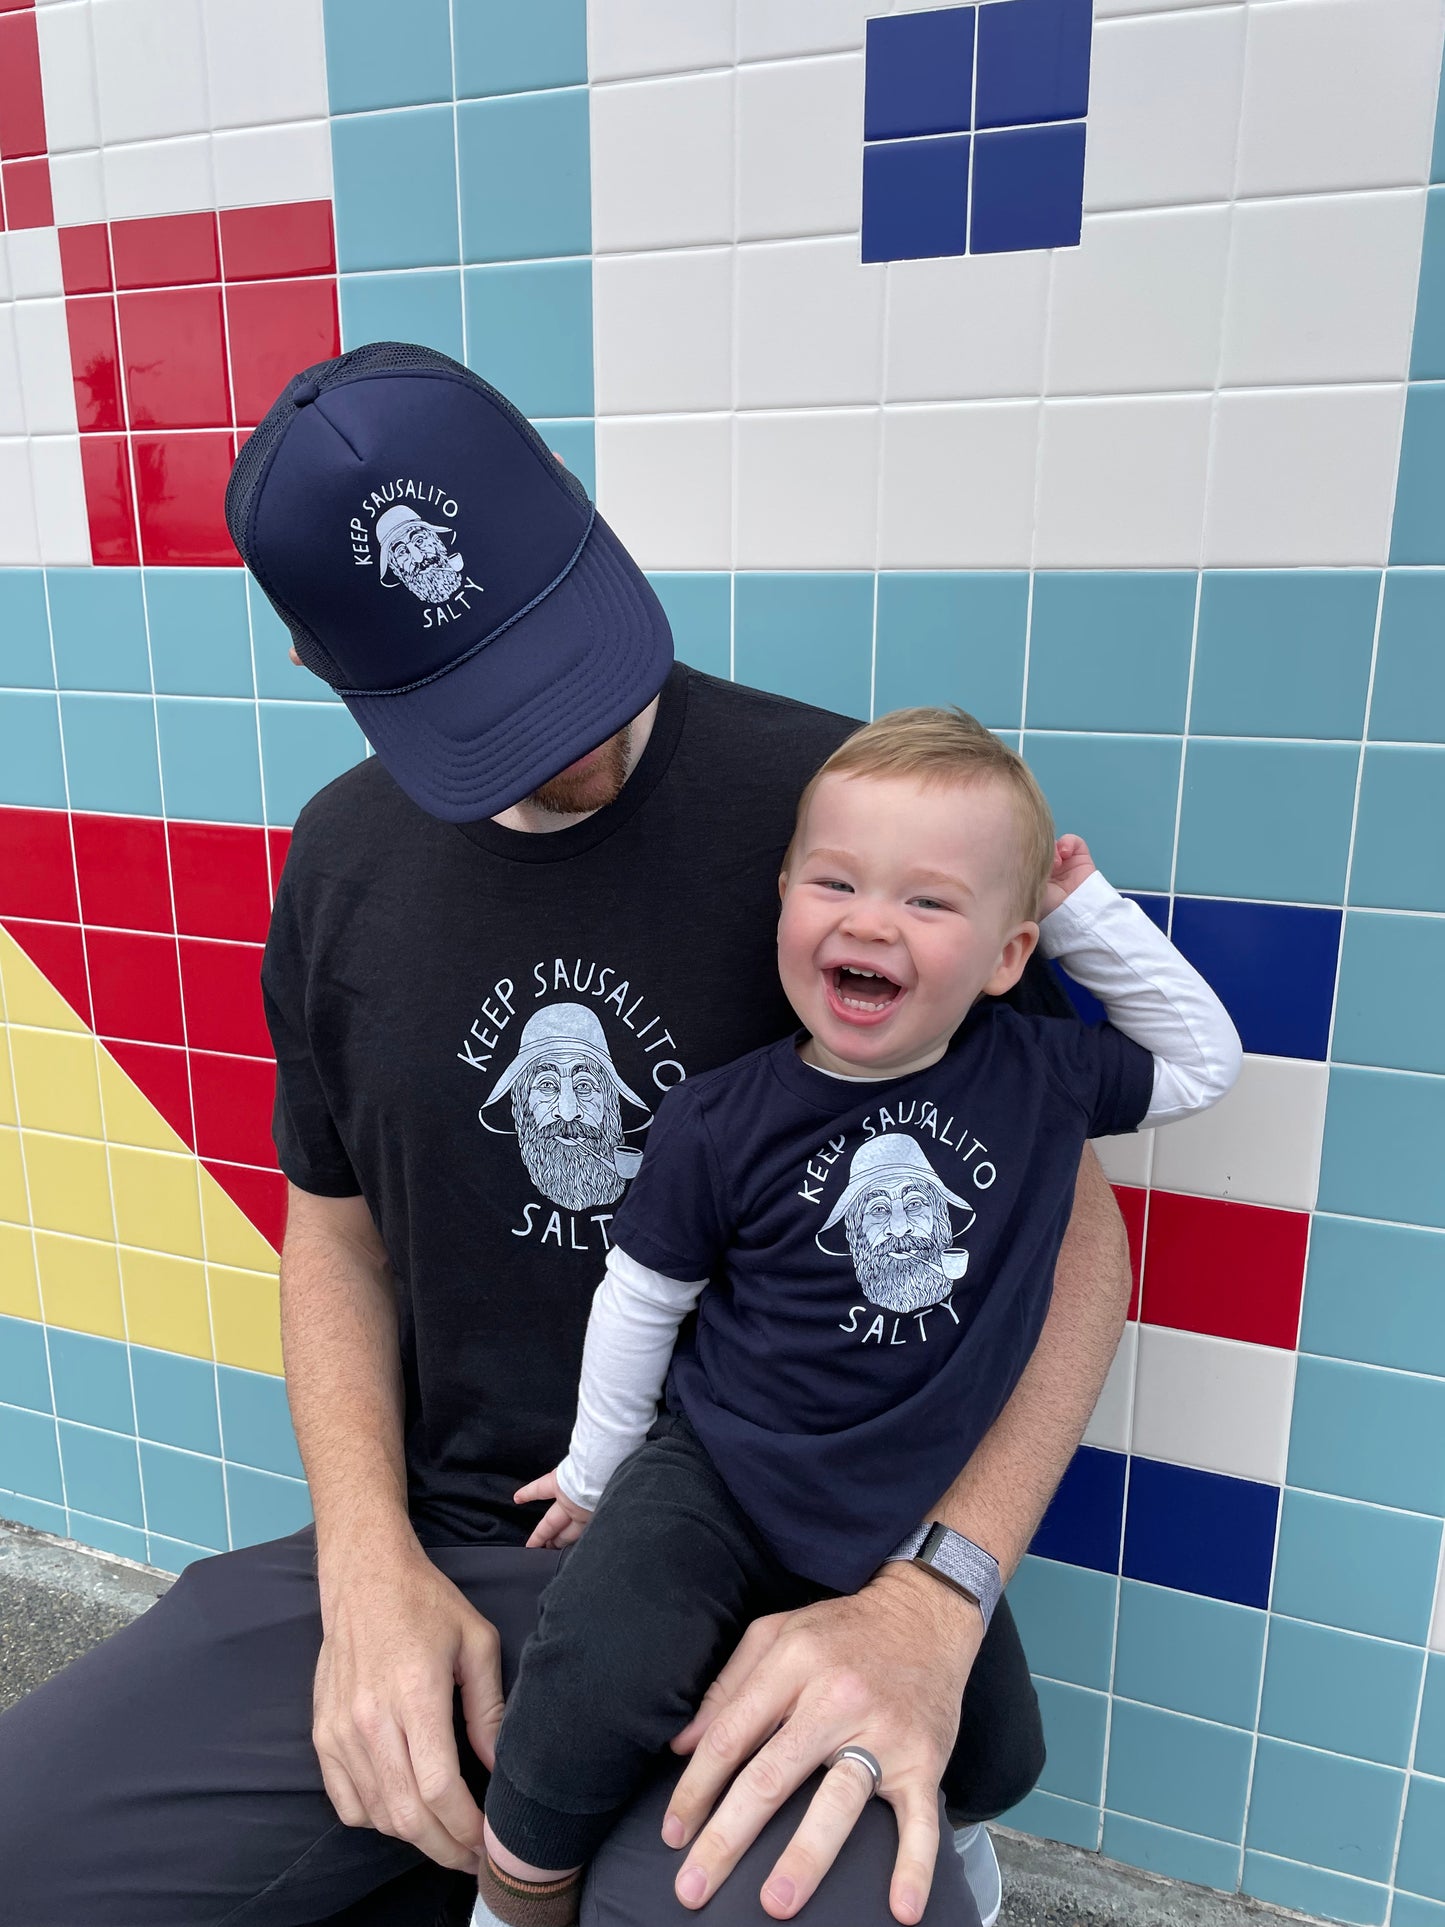 Keep Sausalito Salty: Navy Cotton T-Shirt / Kids 2T- Youth 10